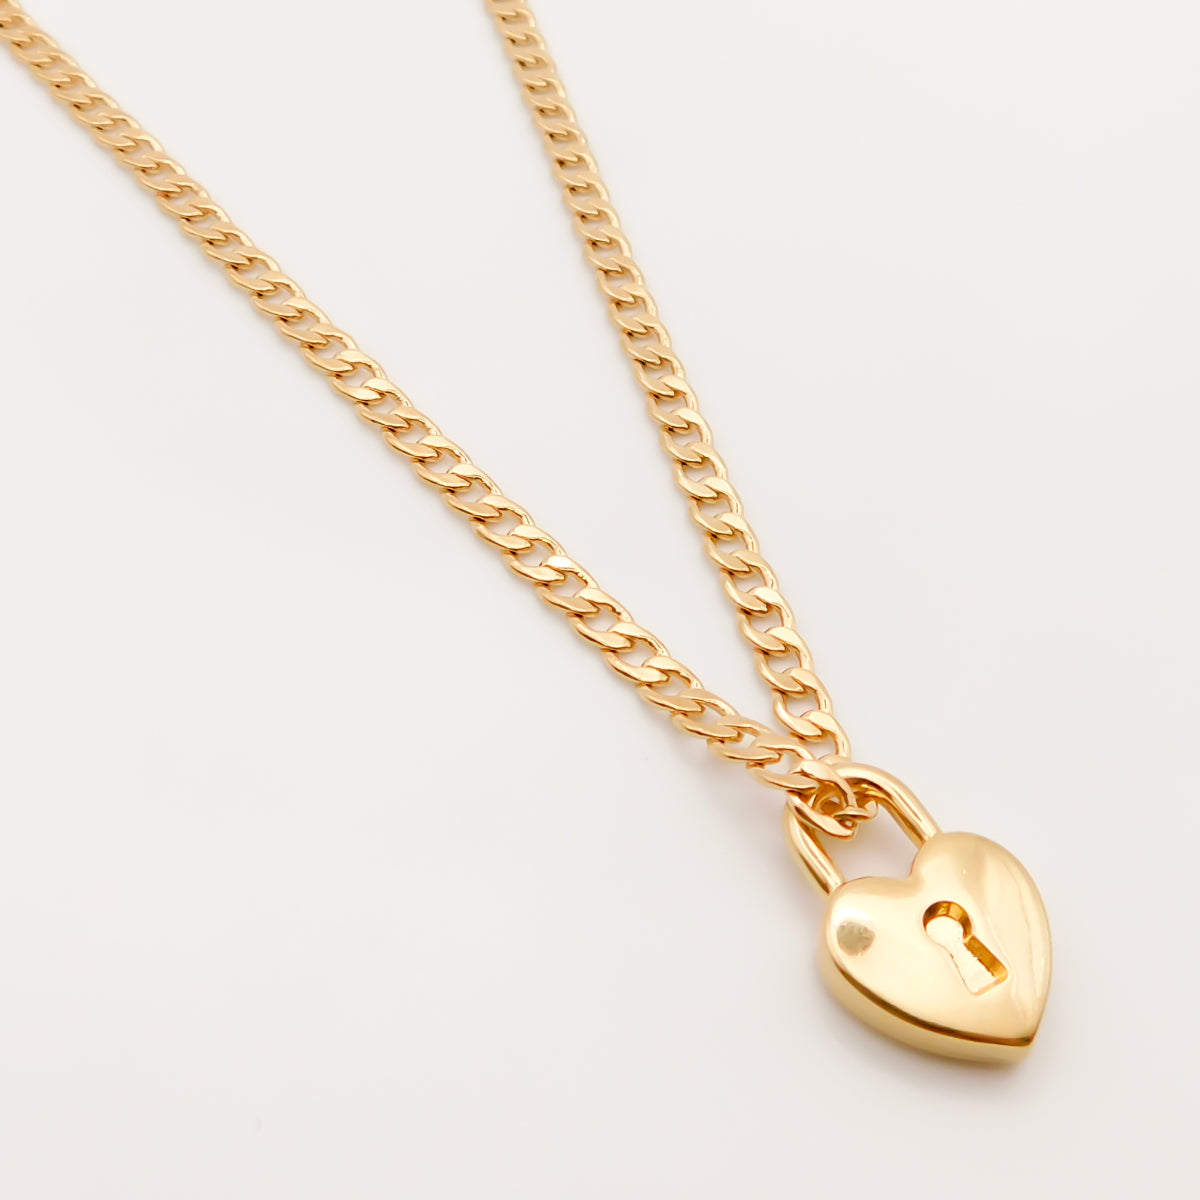 Chain-Link Heart Lock Necklace | Clutch Bags New York